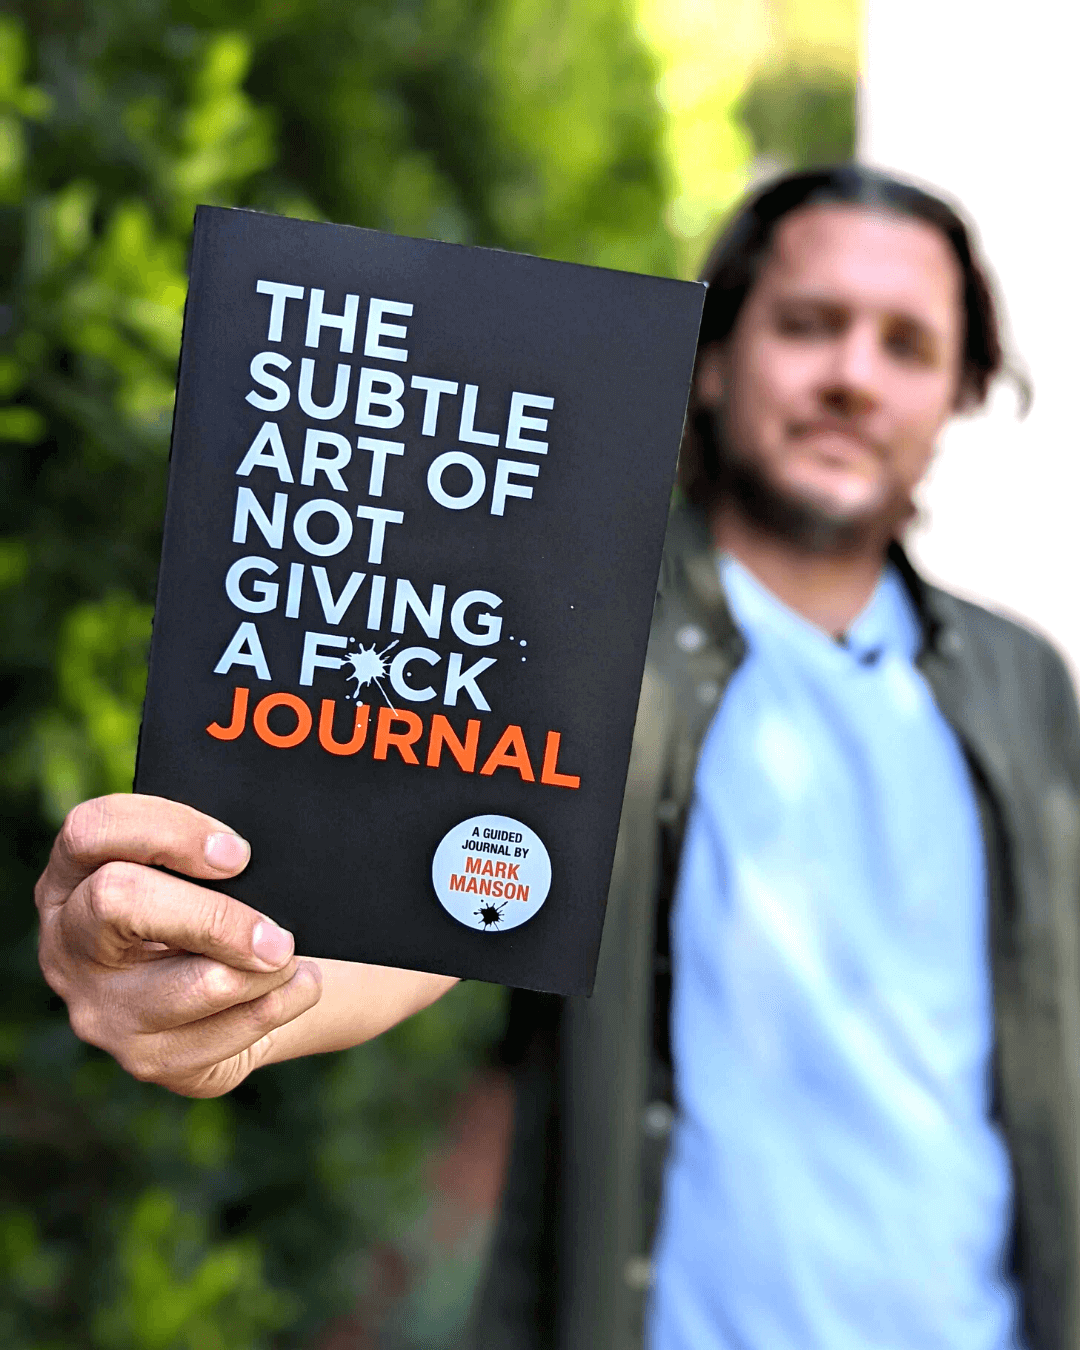 Mark Manson holding a copy of The Subtle Art of Not Giving a F*ck Journal